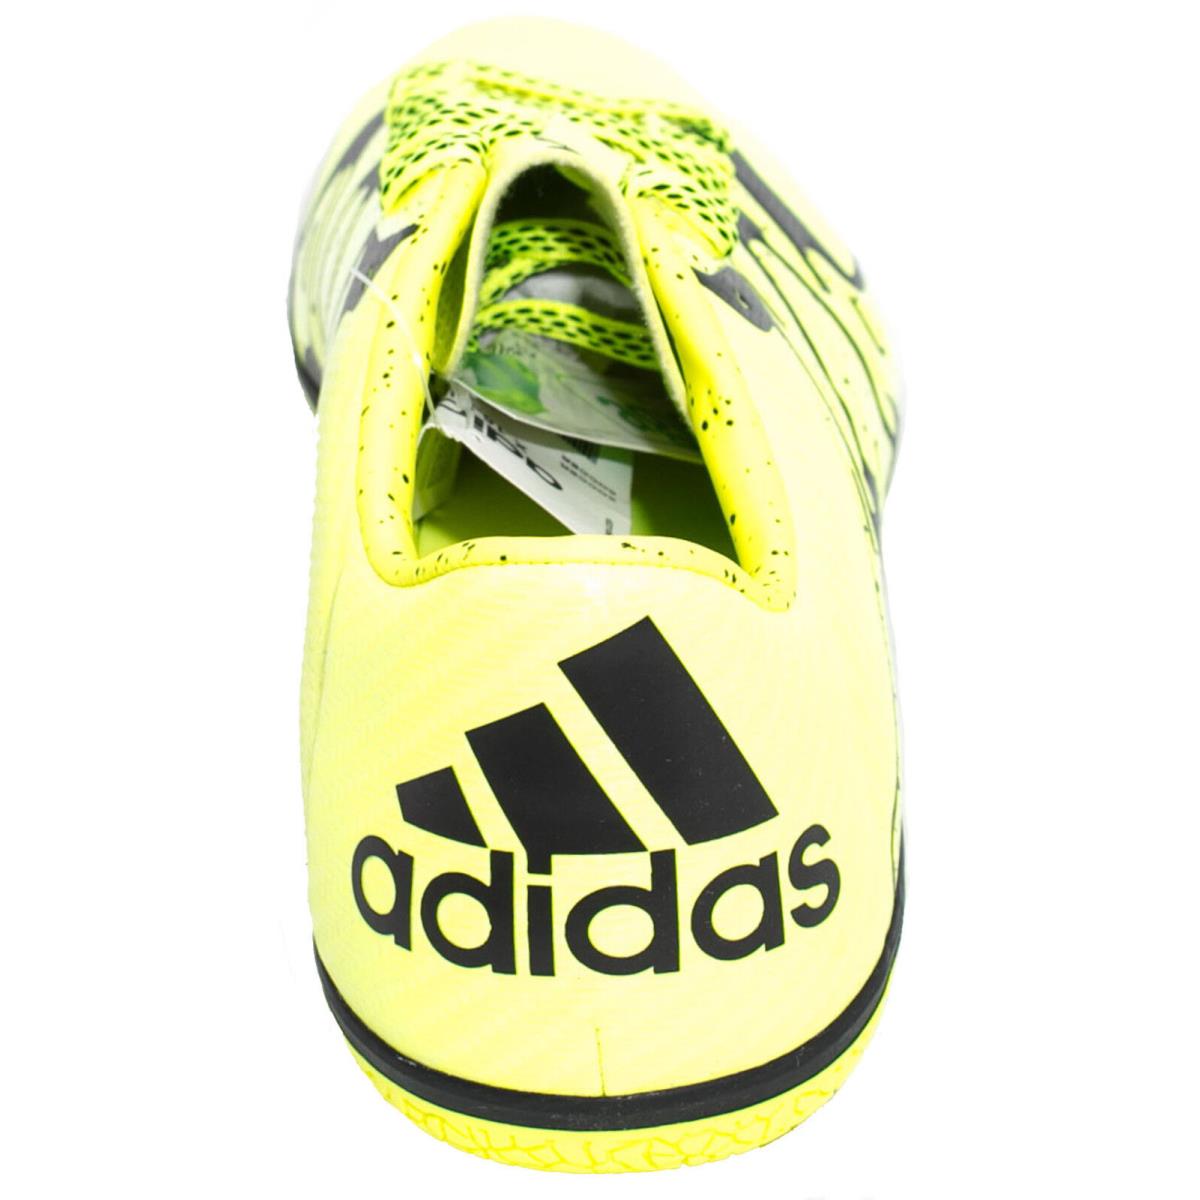 Adidas shoes  - Yellow 1